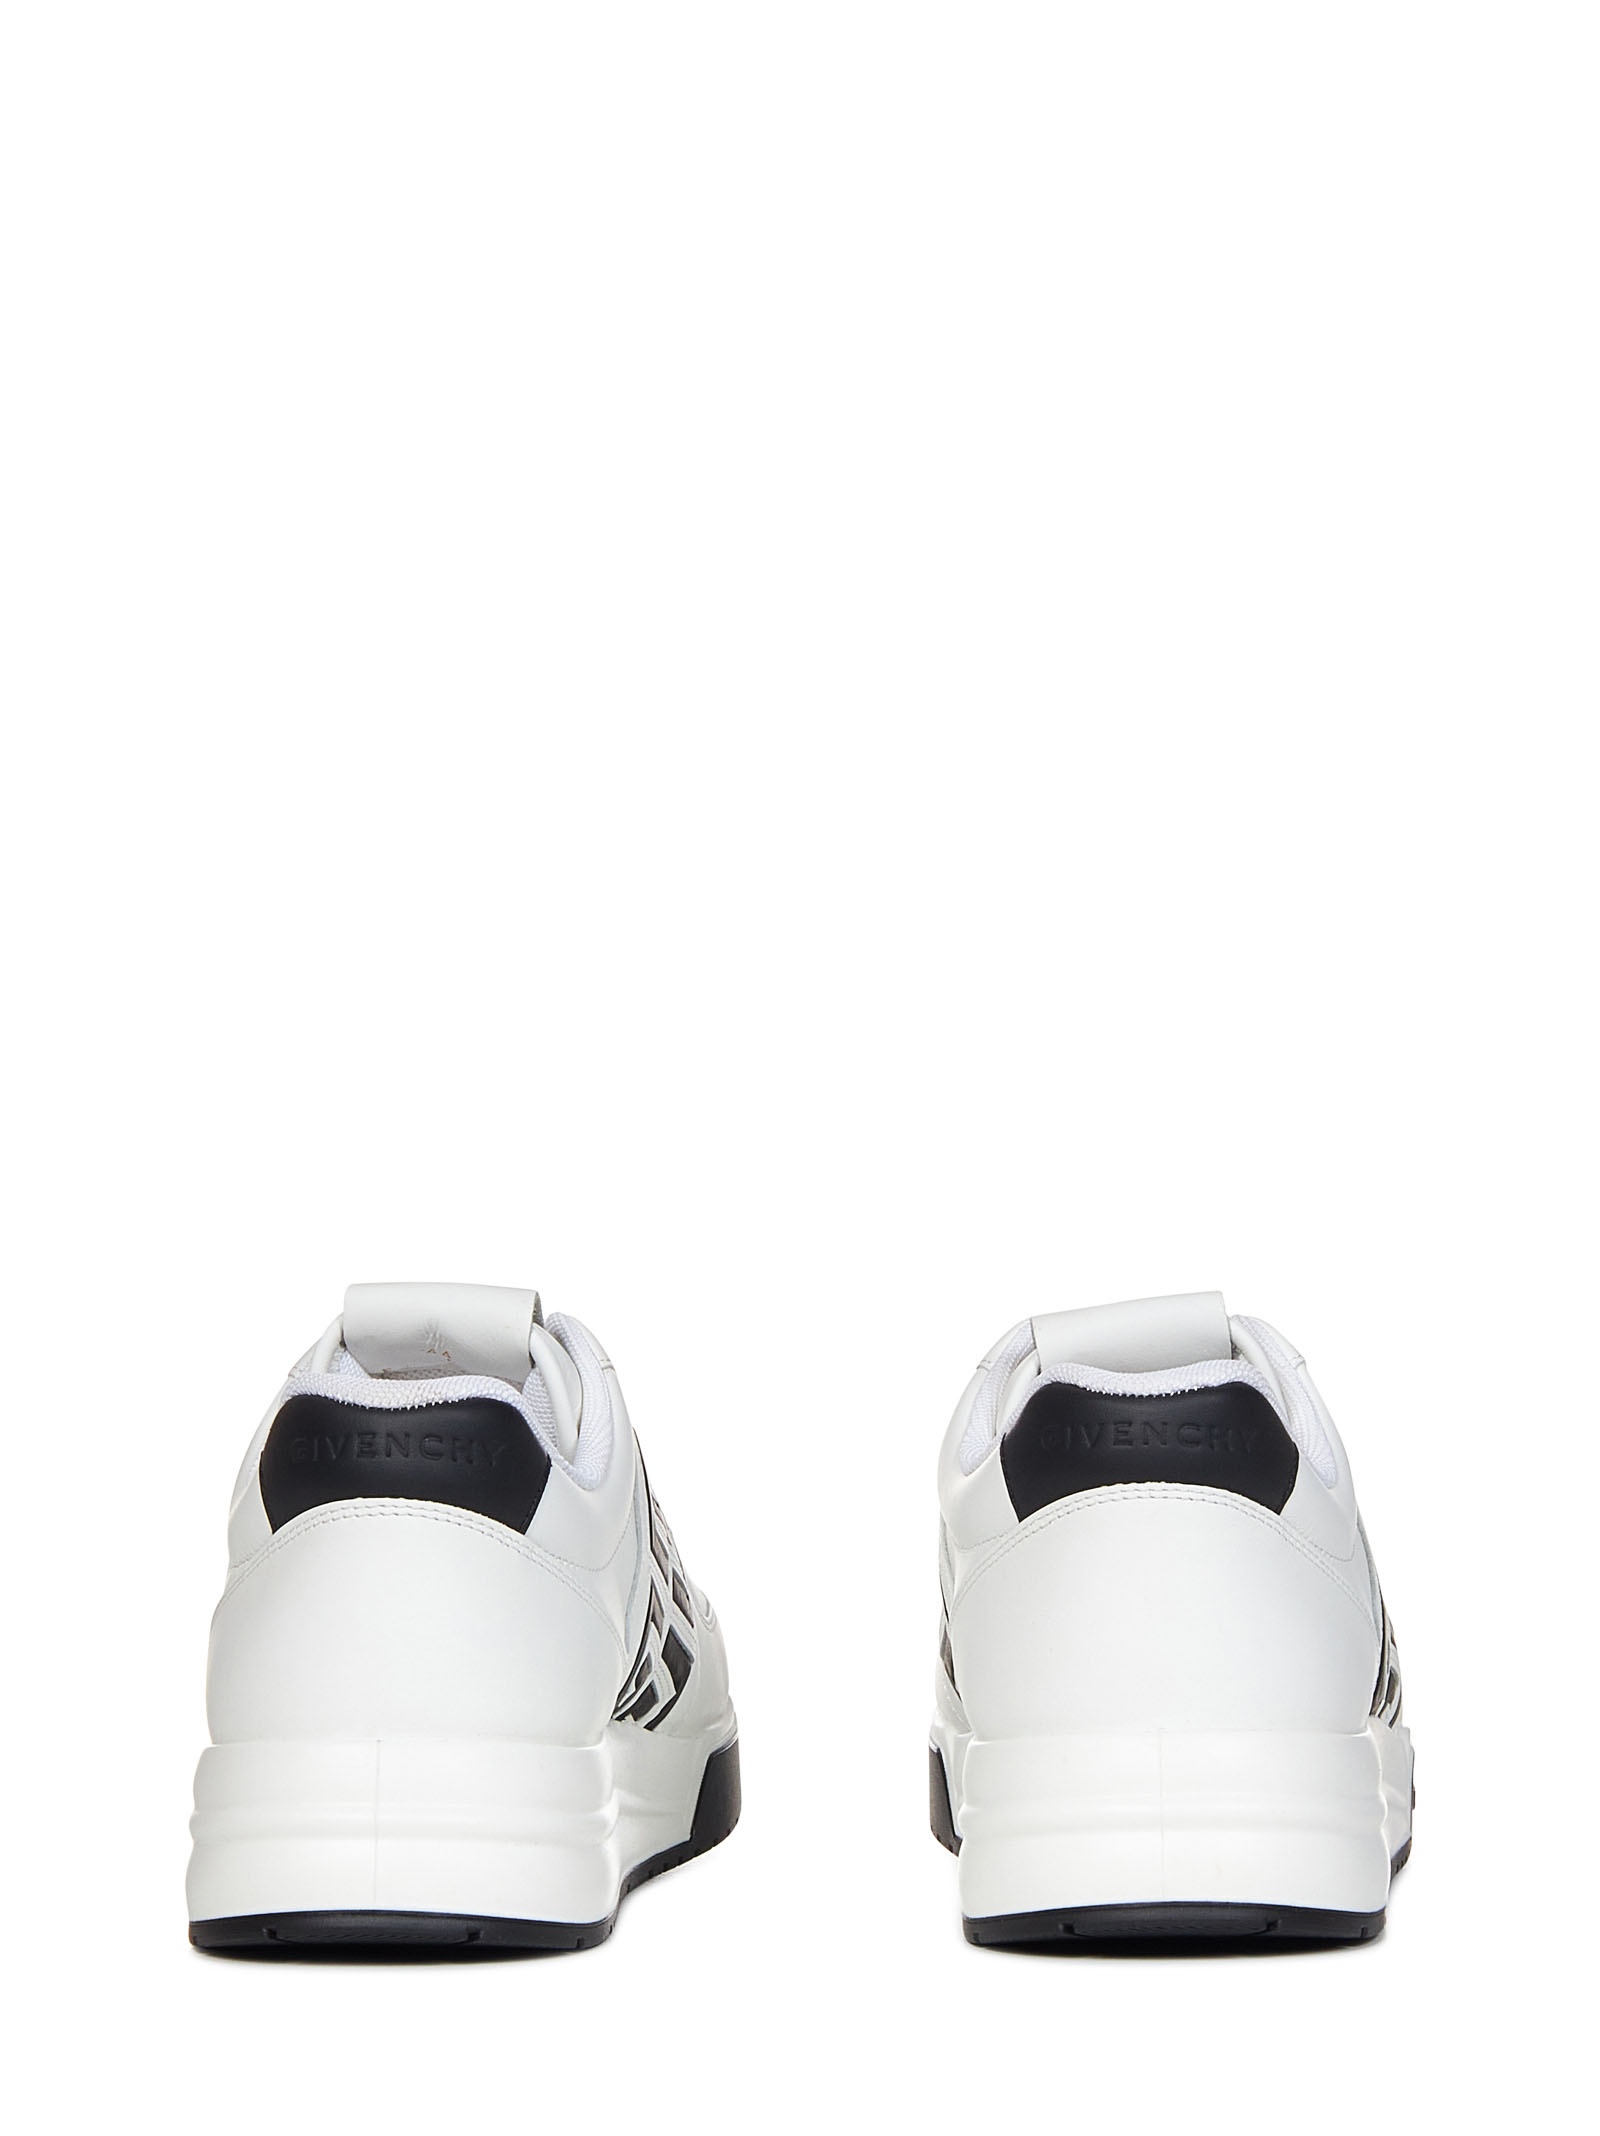 White calf leather low-top sneakers with embossed black 4G logo at side. - 4